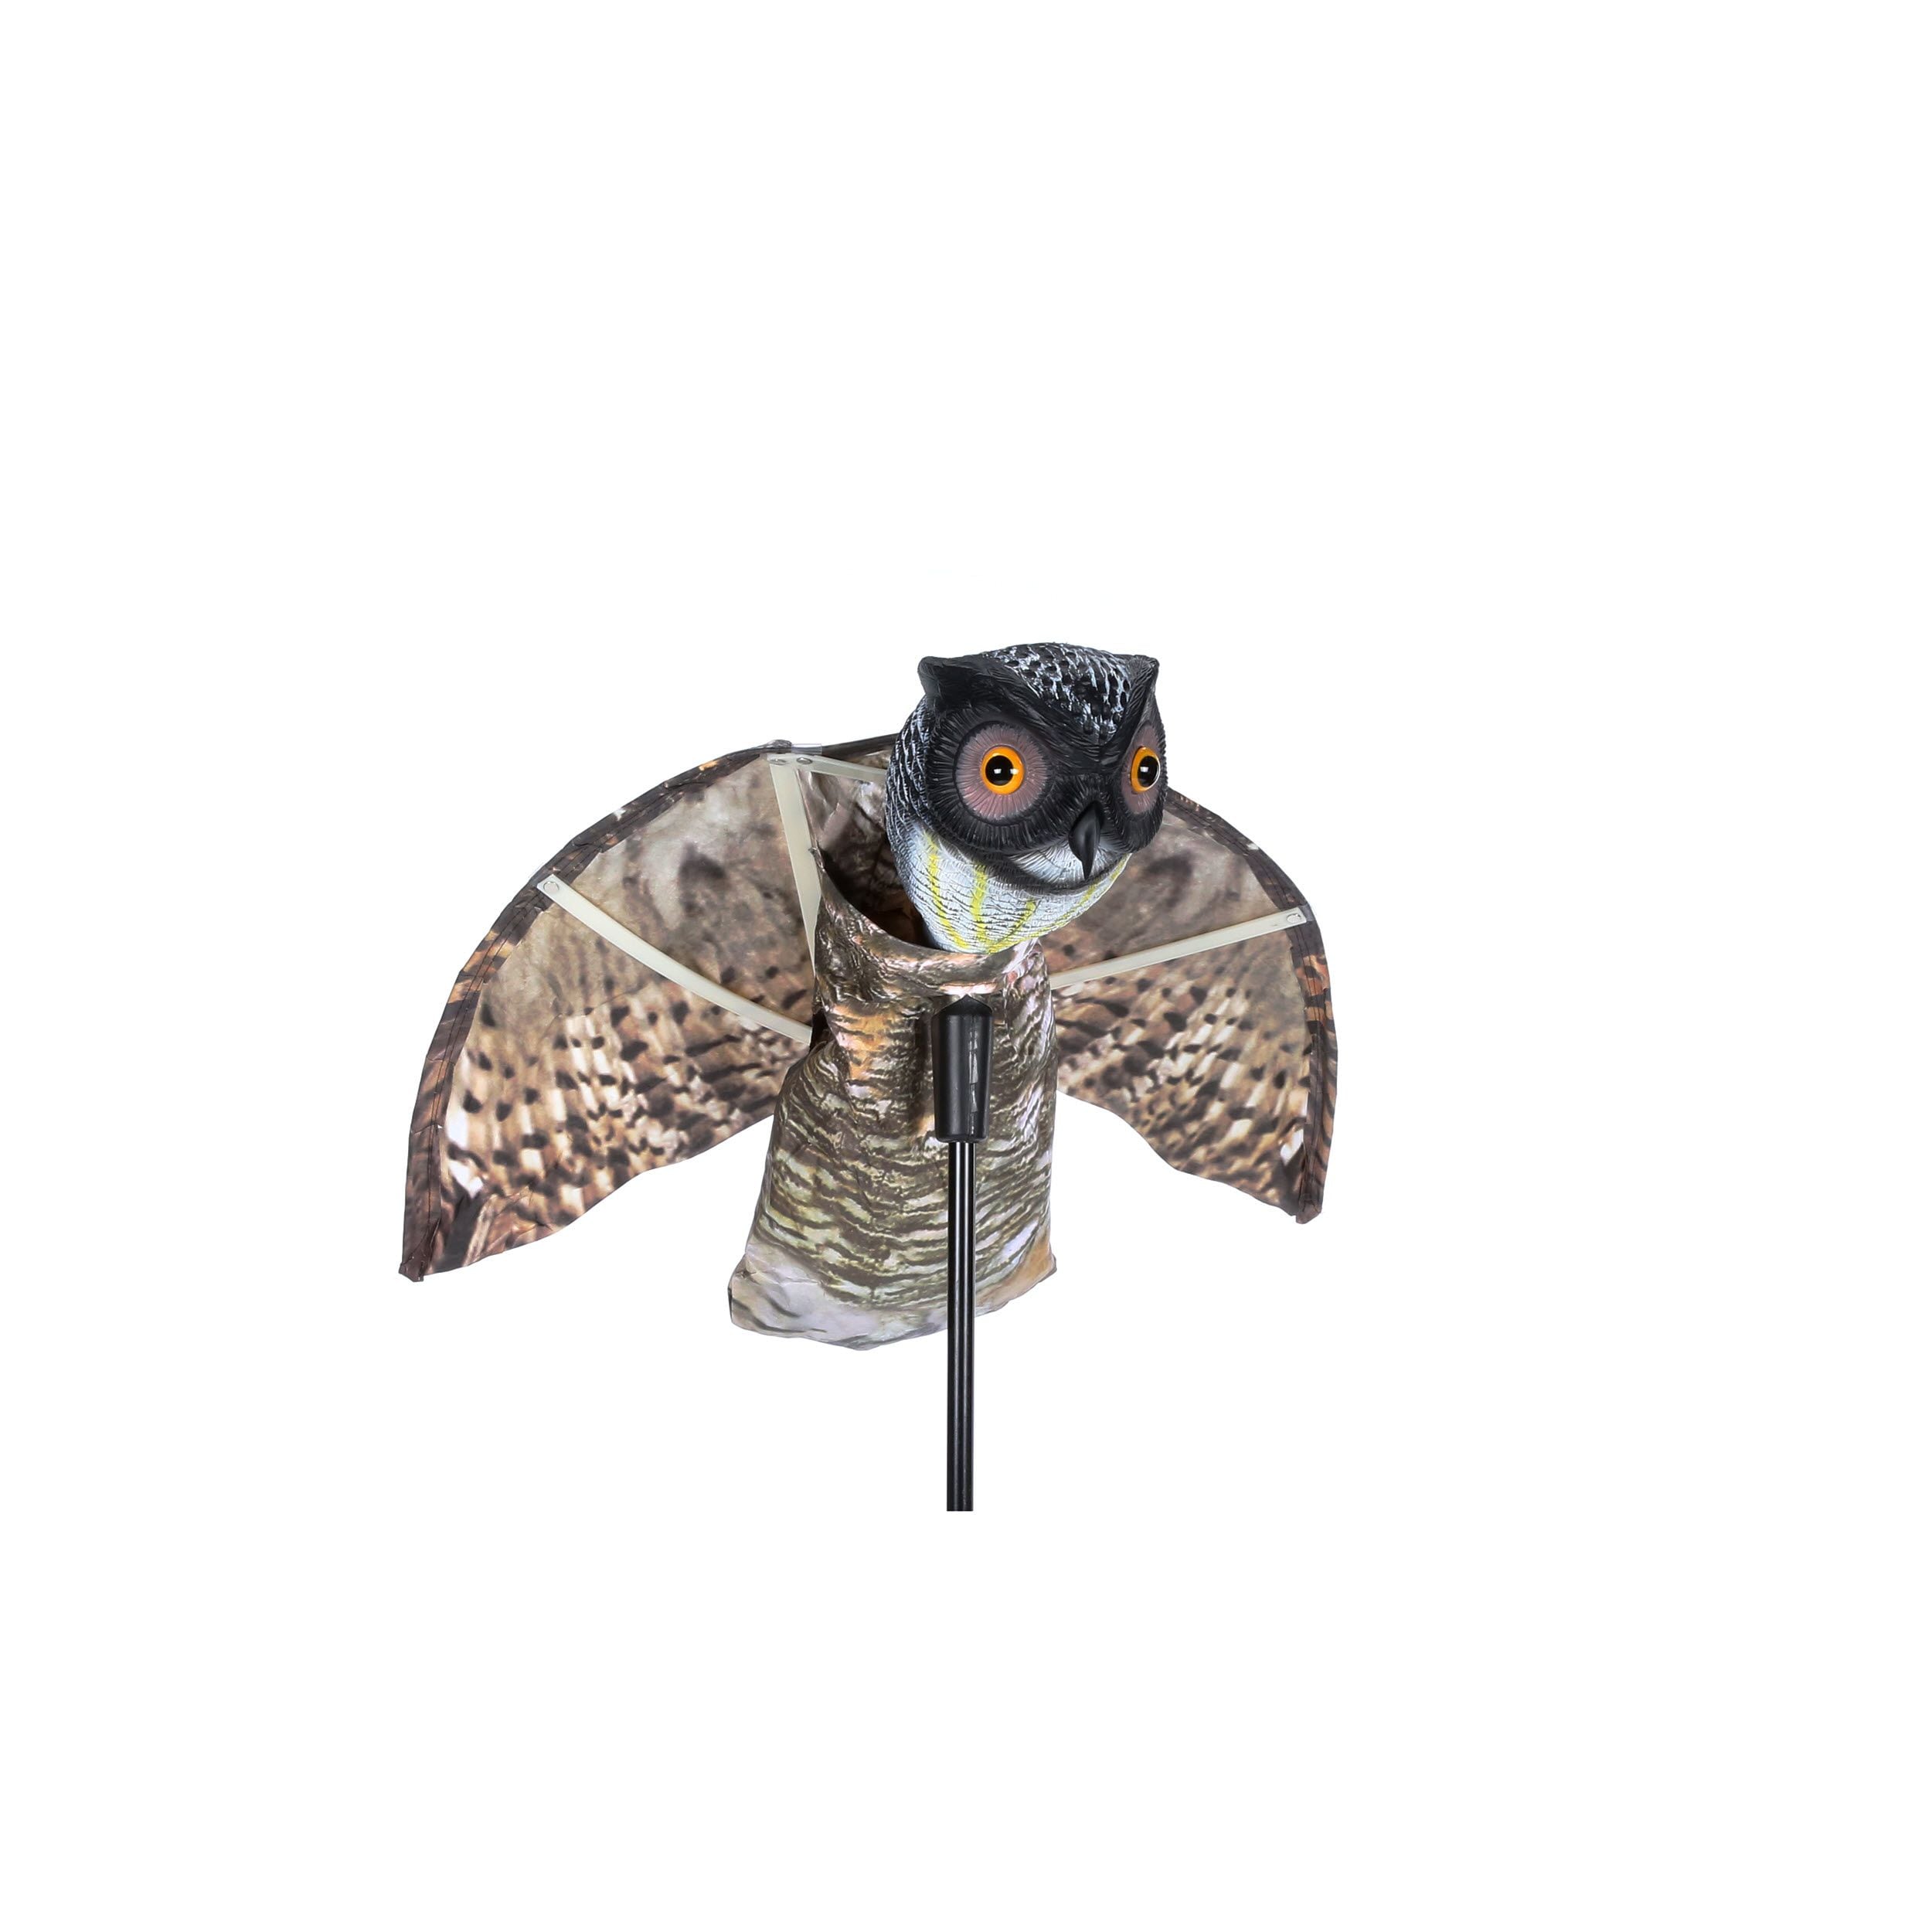 Prowler Owl with Flapping Wings Decoy Scarecrow Bird Repellent Scare Pigeons 